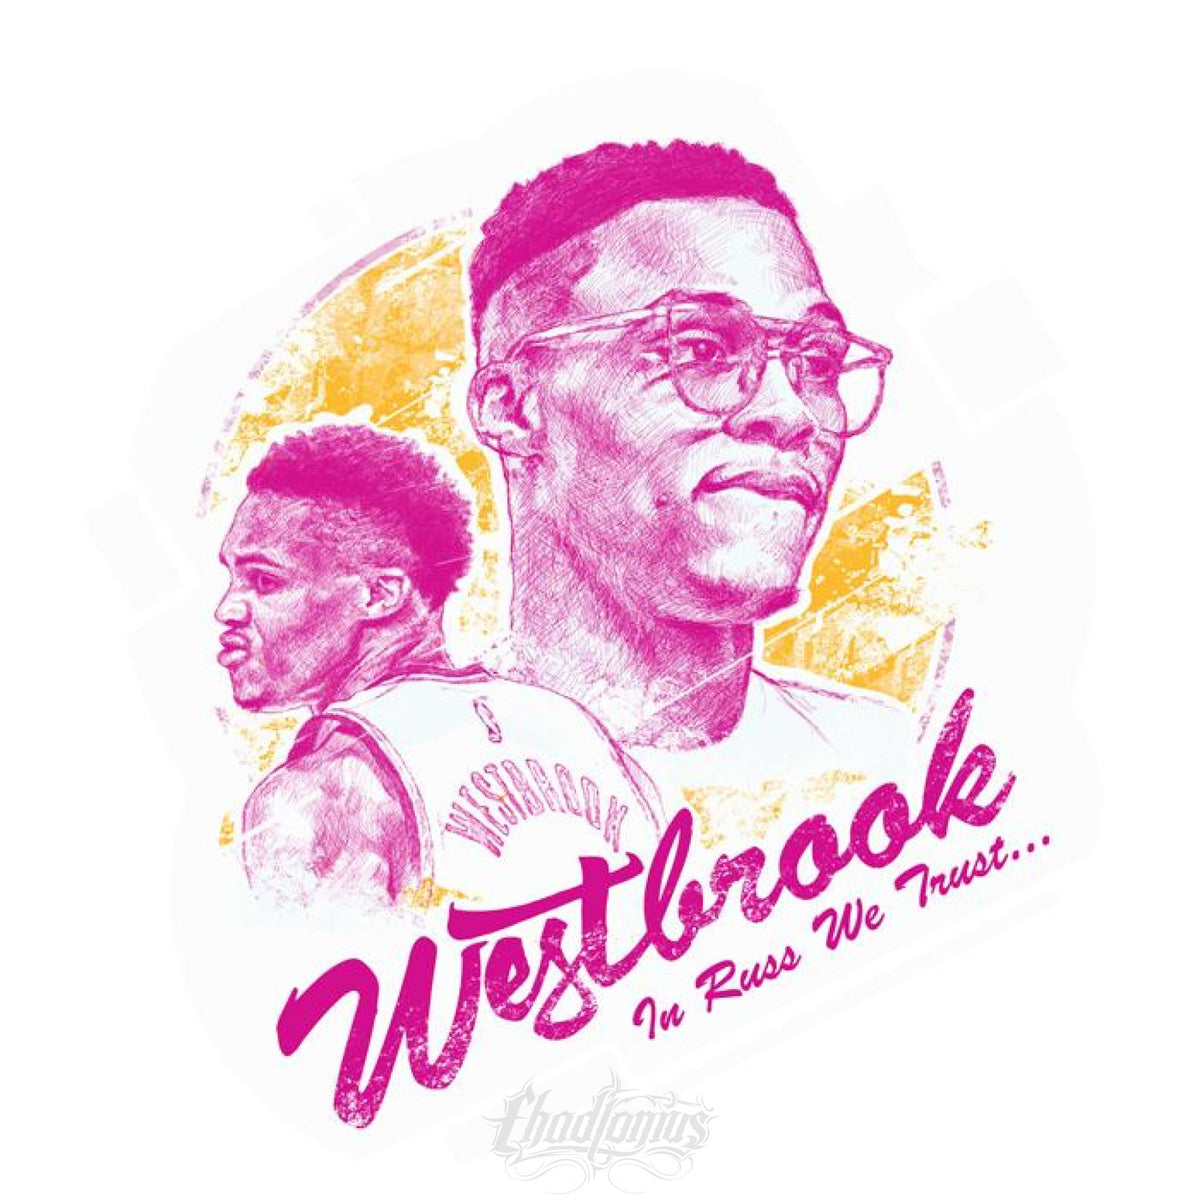 youth russell westbrook shirt